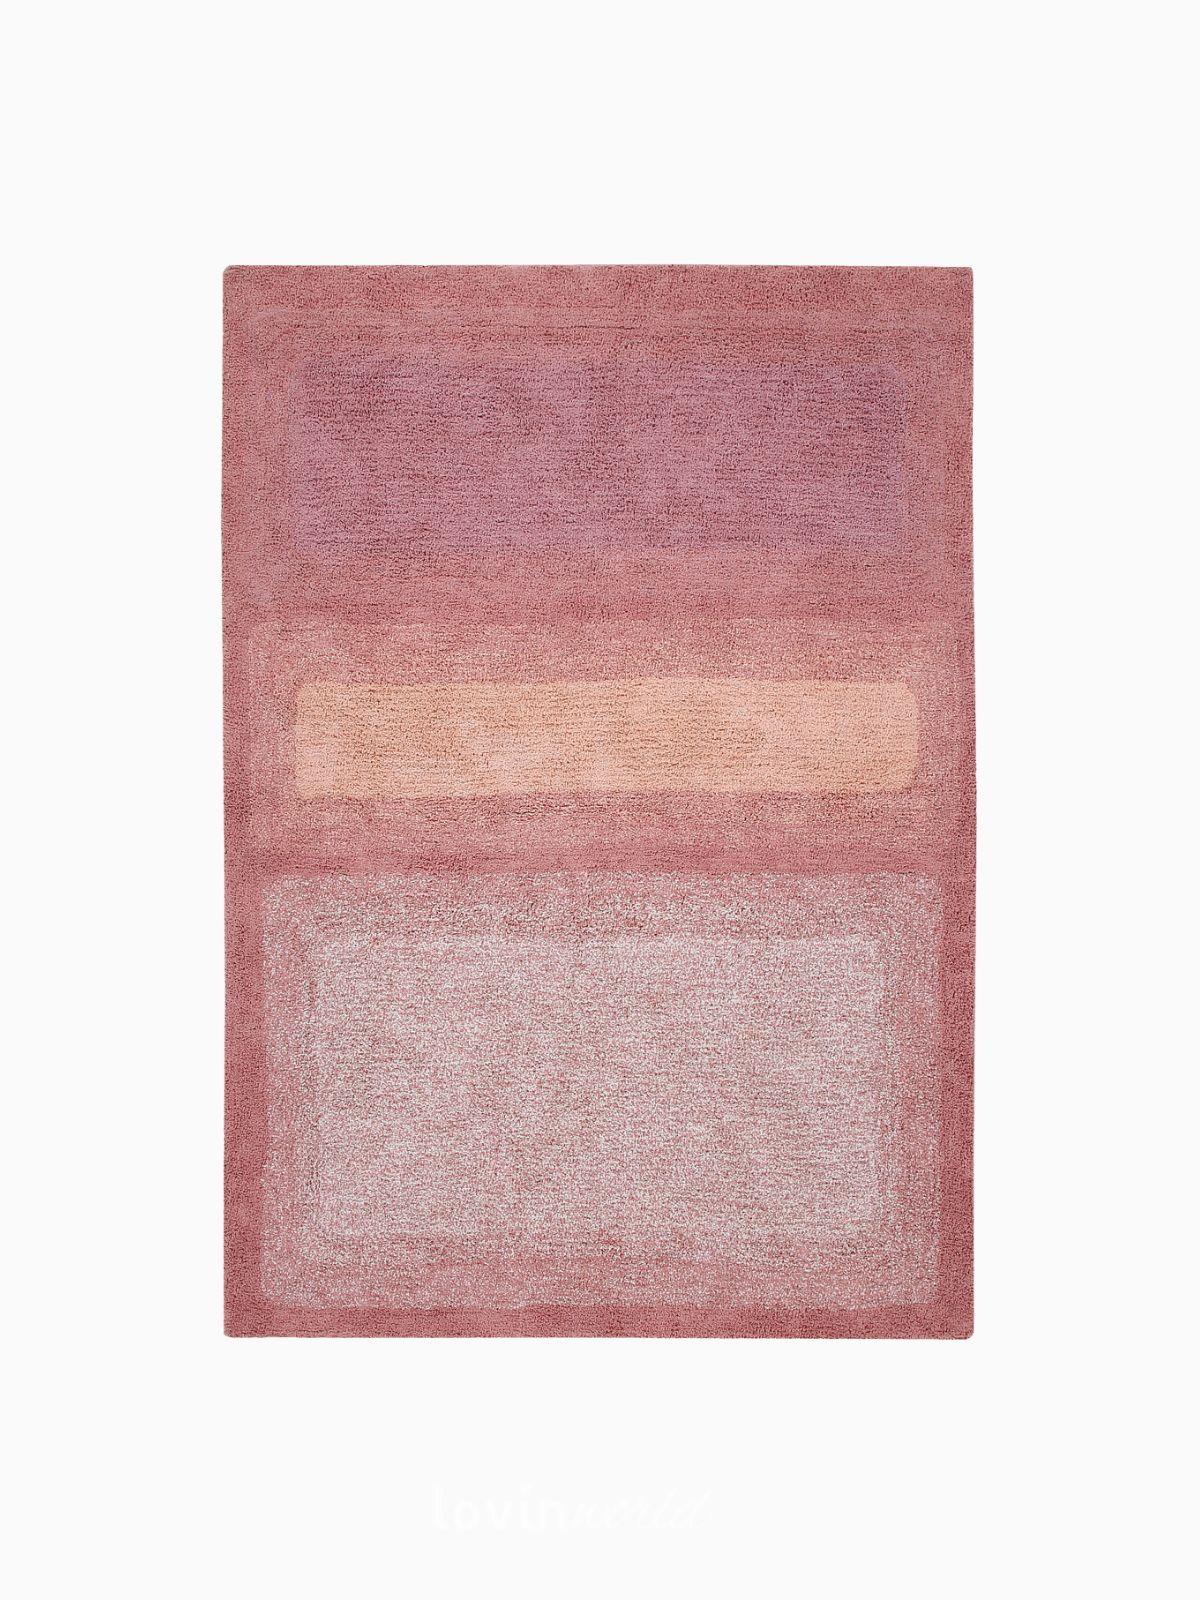 Tappeto in cotone lavabile Water Canyon Rose, 140x200 cm.-1